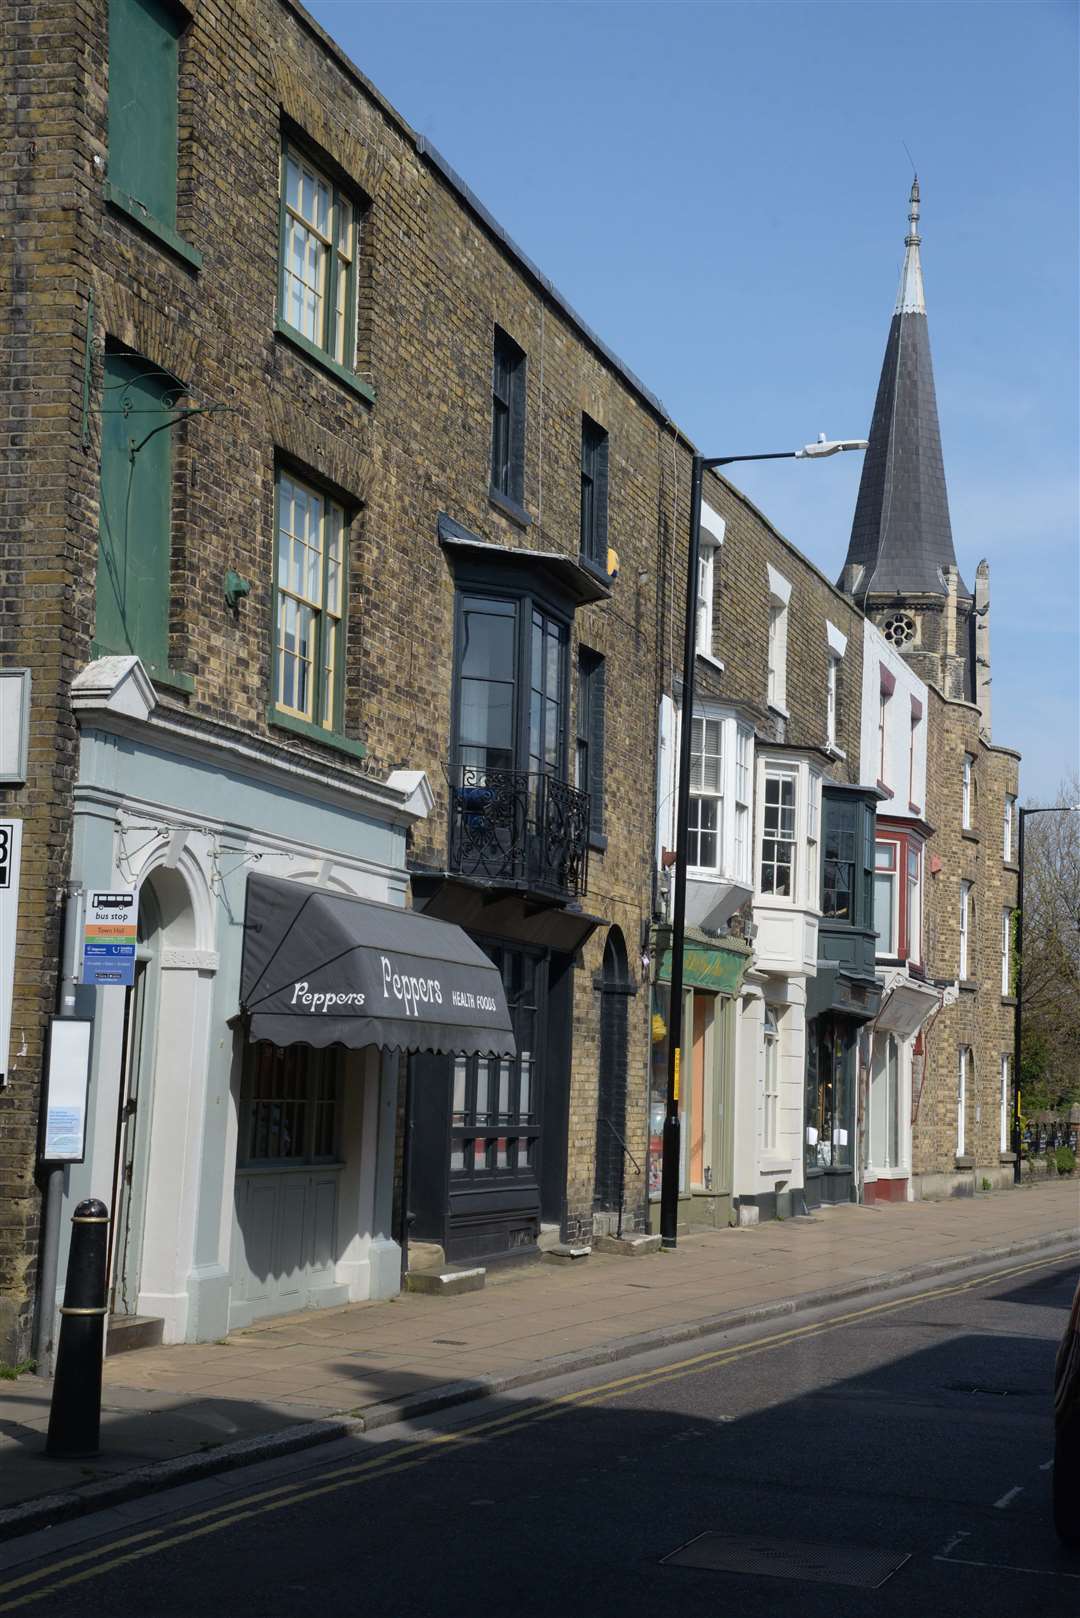 The North End of the High Street is usually busiest on Saturdays